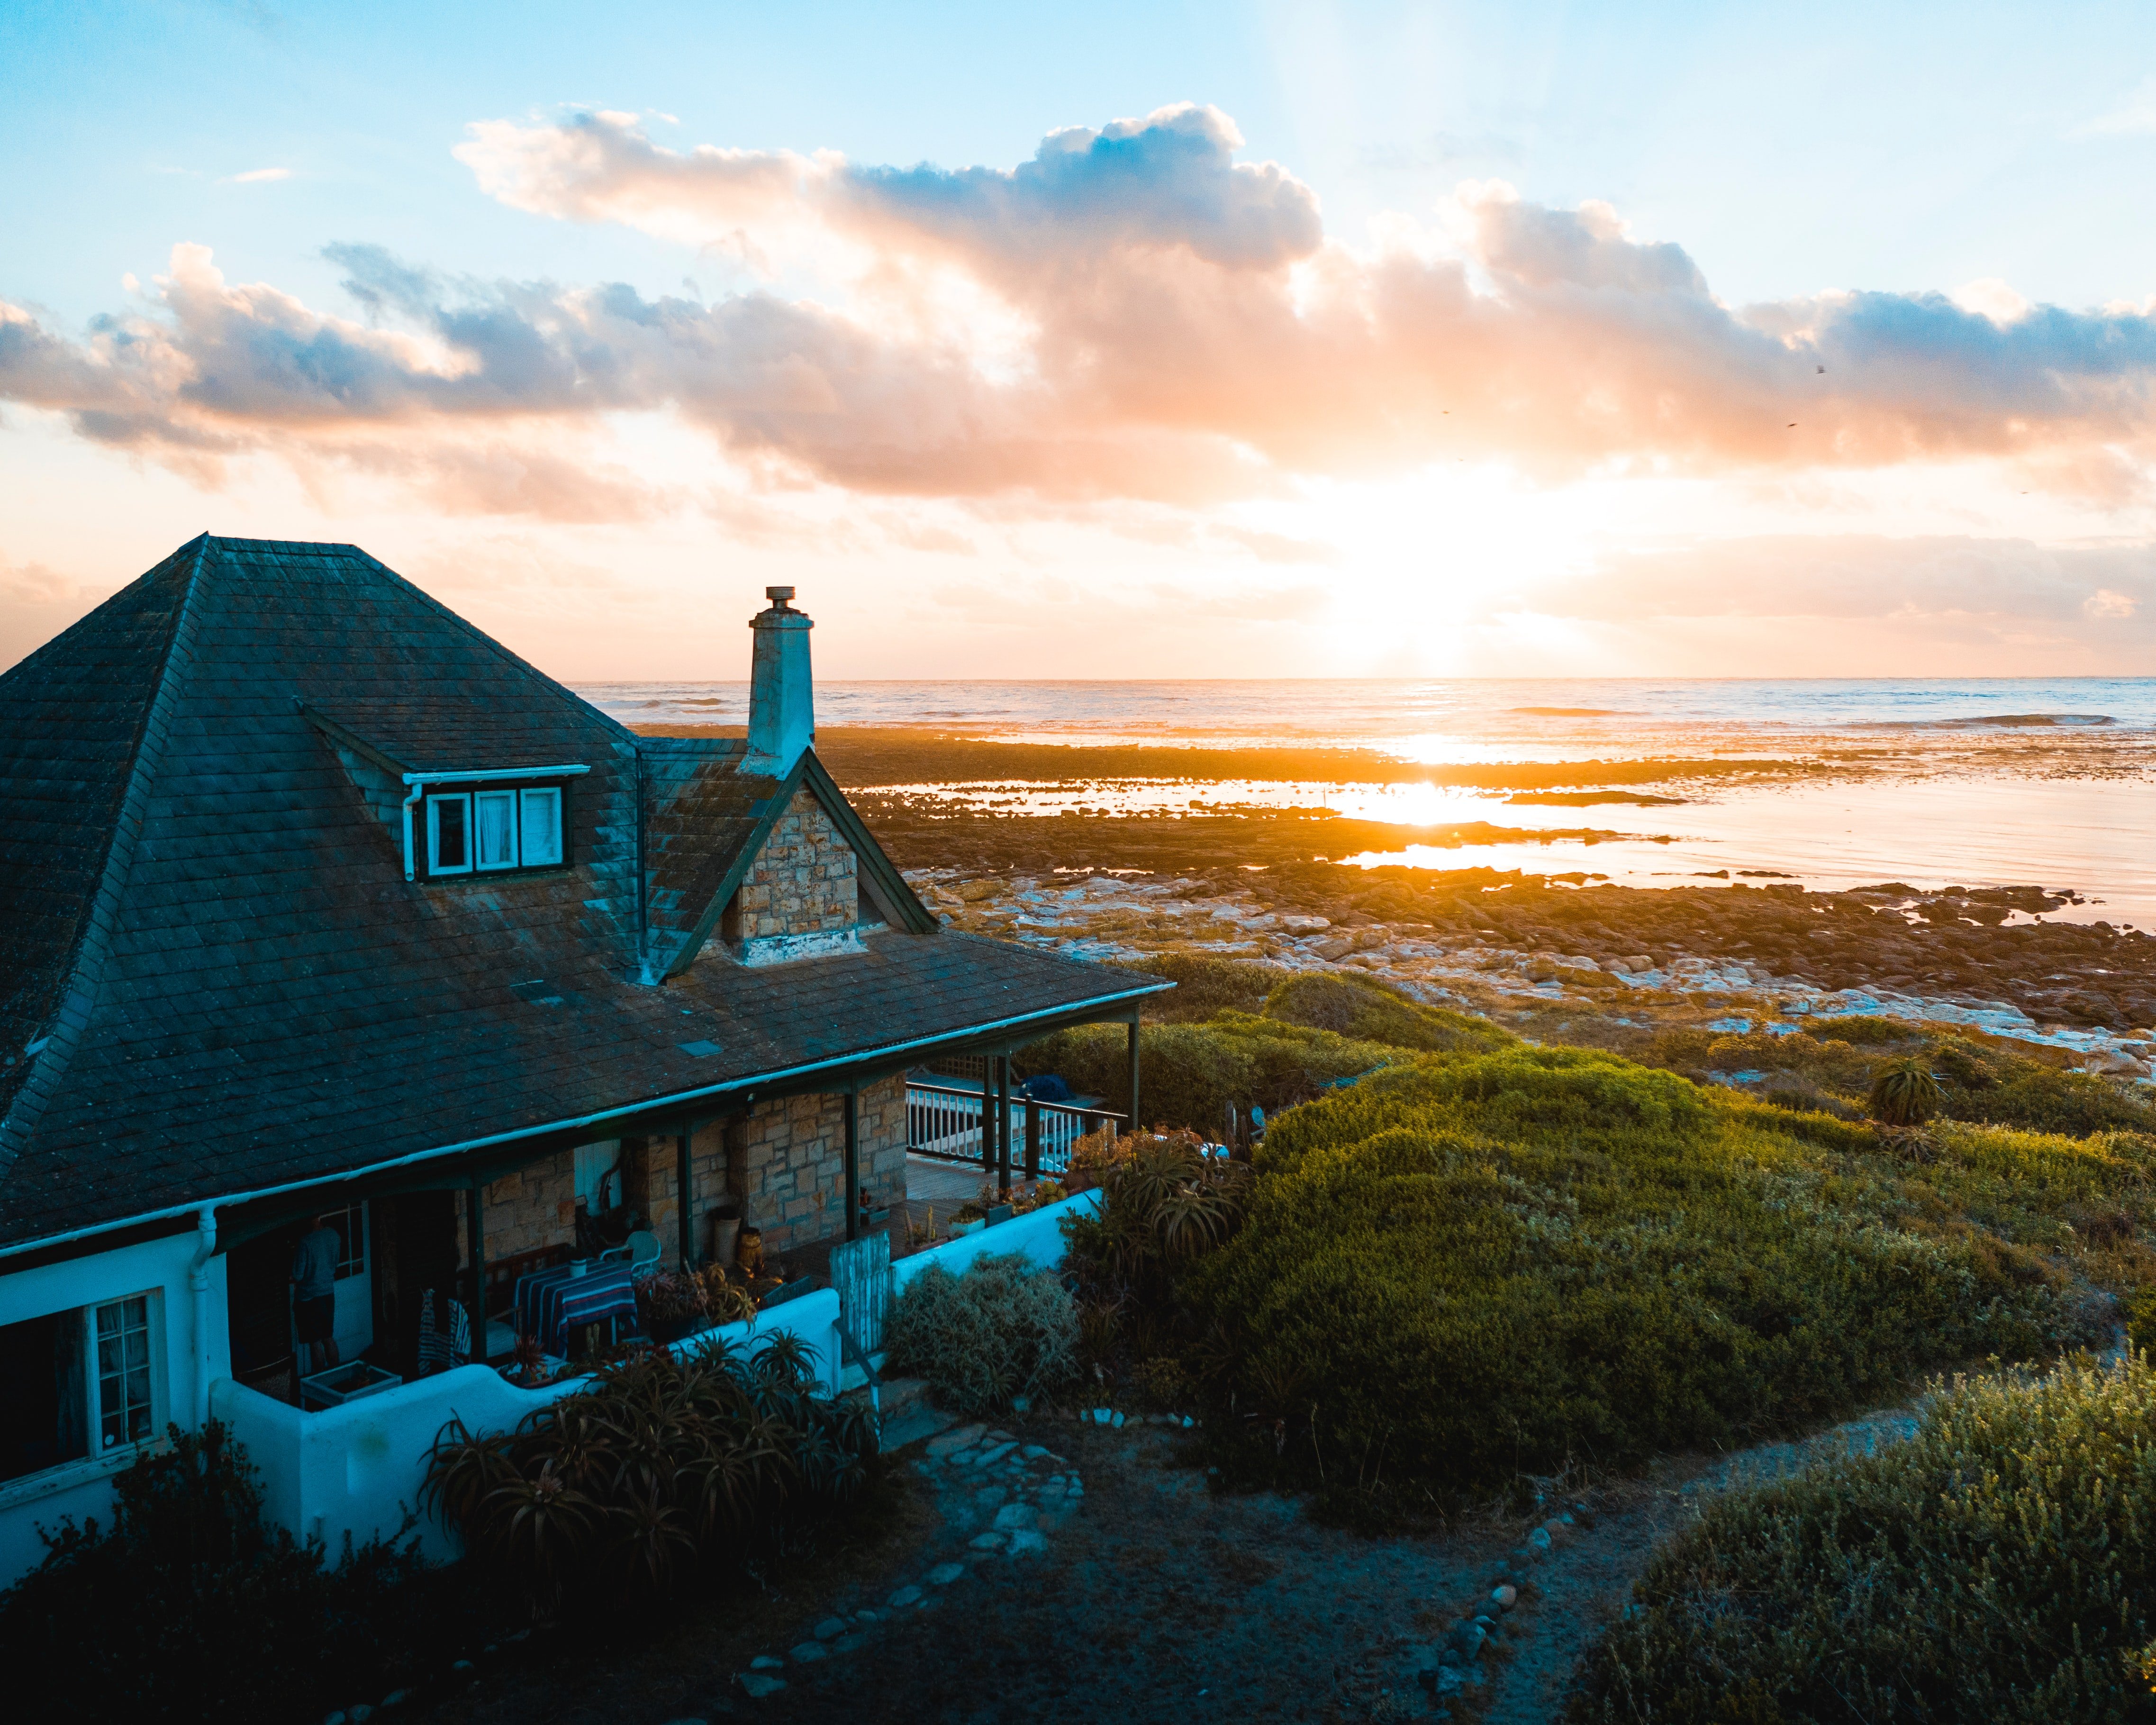 Tim bought Jared a cottage by the sea. | Source: Unsplash